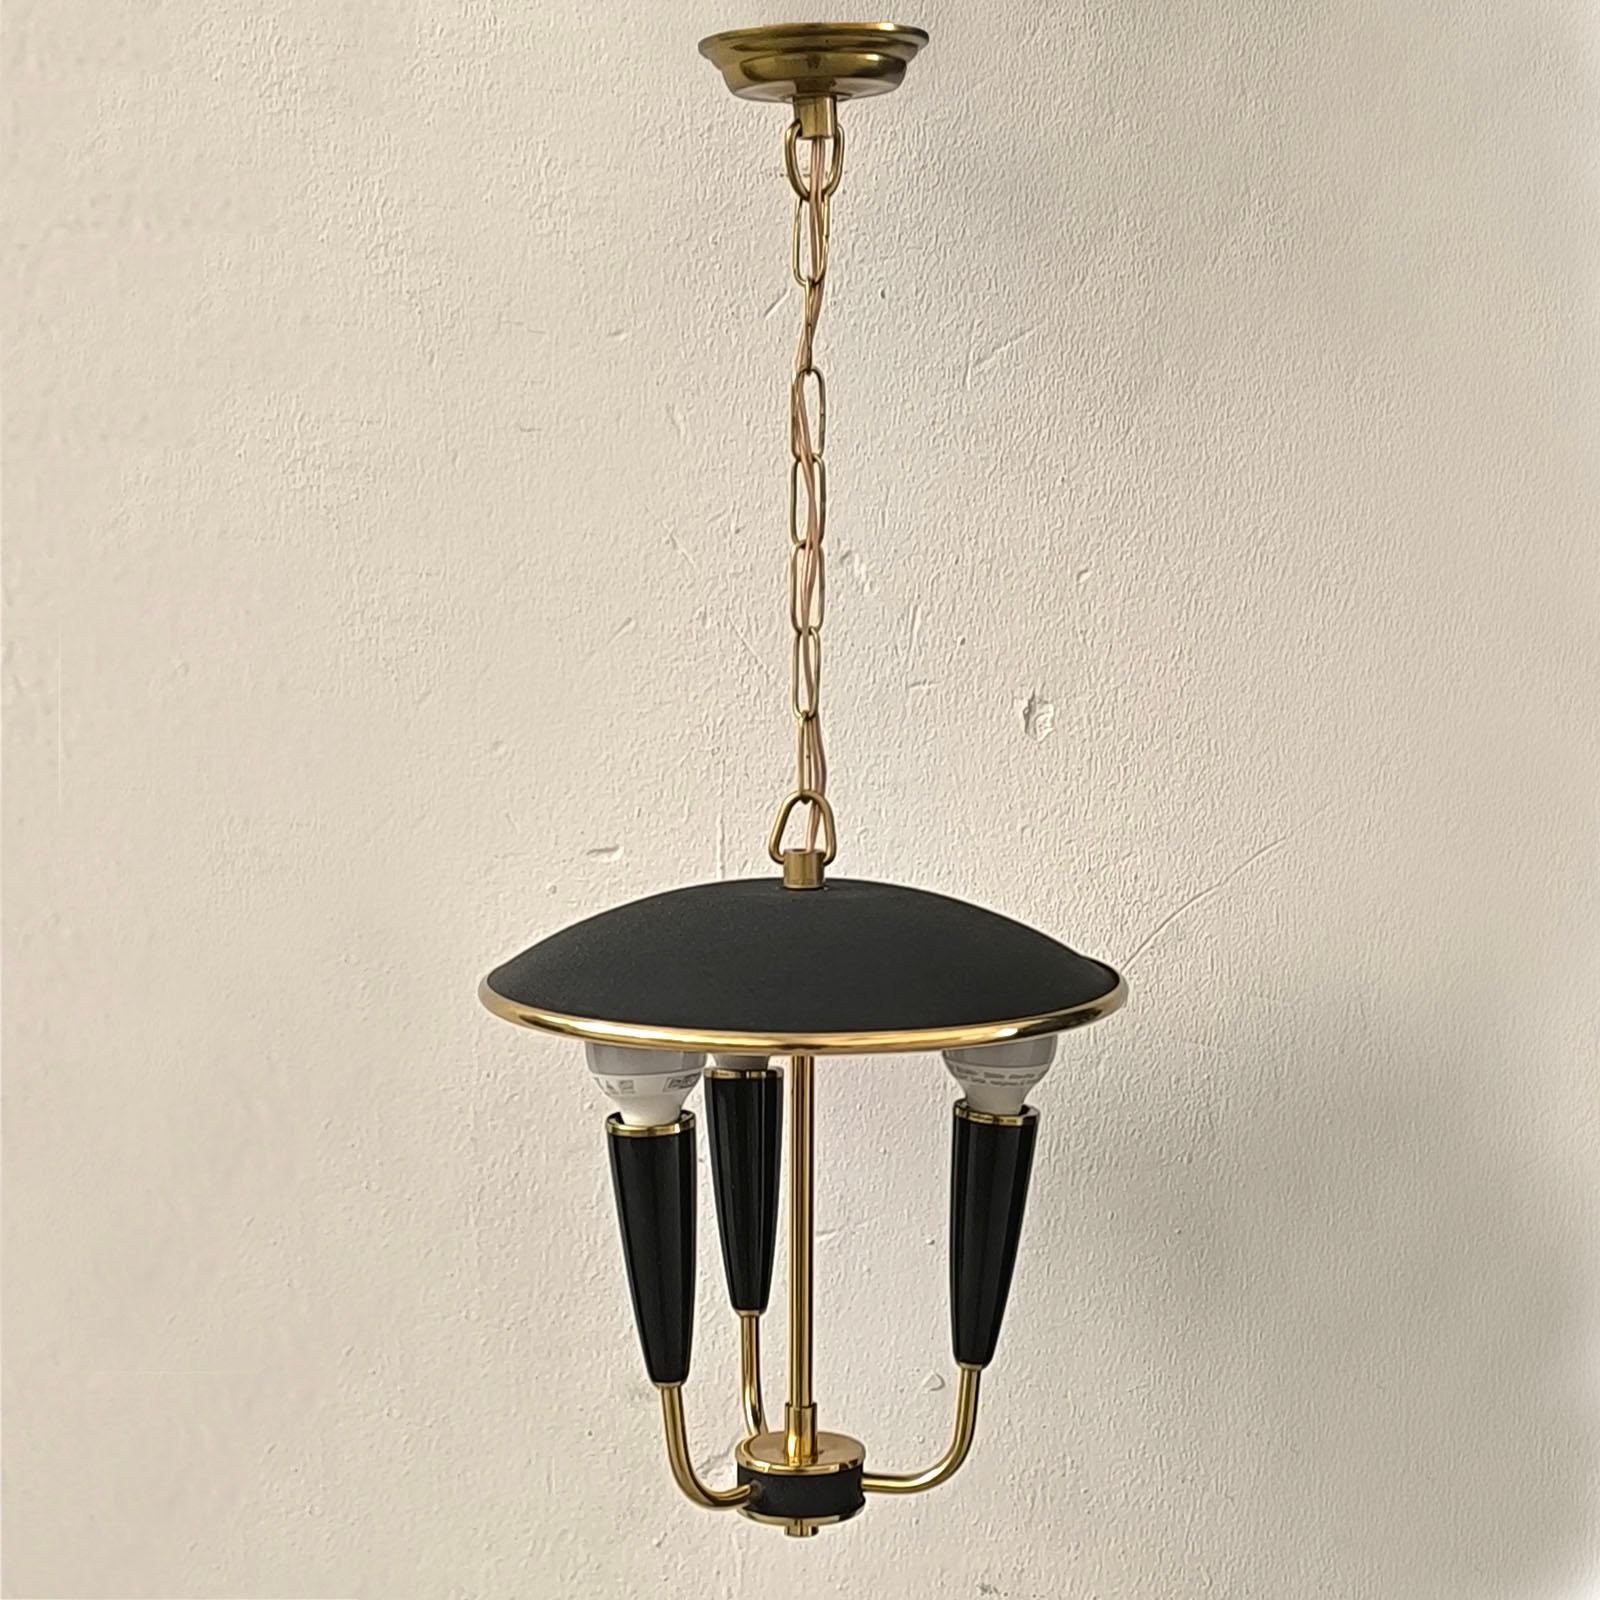 A Mid Century pendant lamp in a mixed textured surface.

The contrast of the gold brass and black is striking. The original colors are in good condition. Structural paint covers the top and bottom. Three radially arranged arms are below the